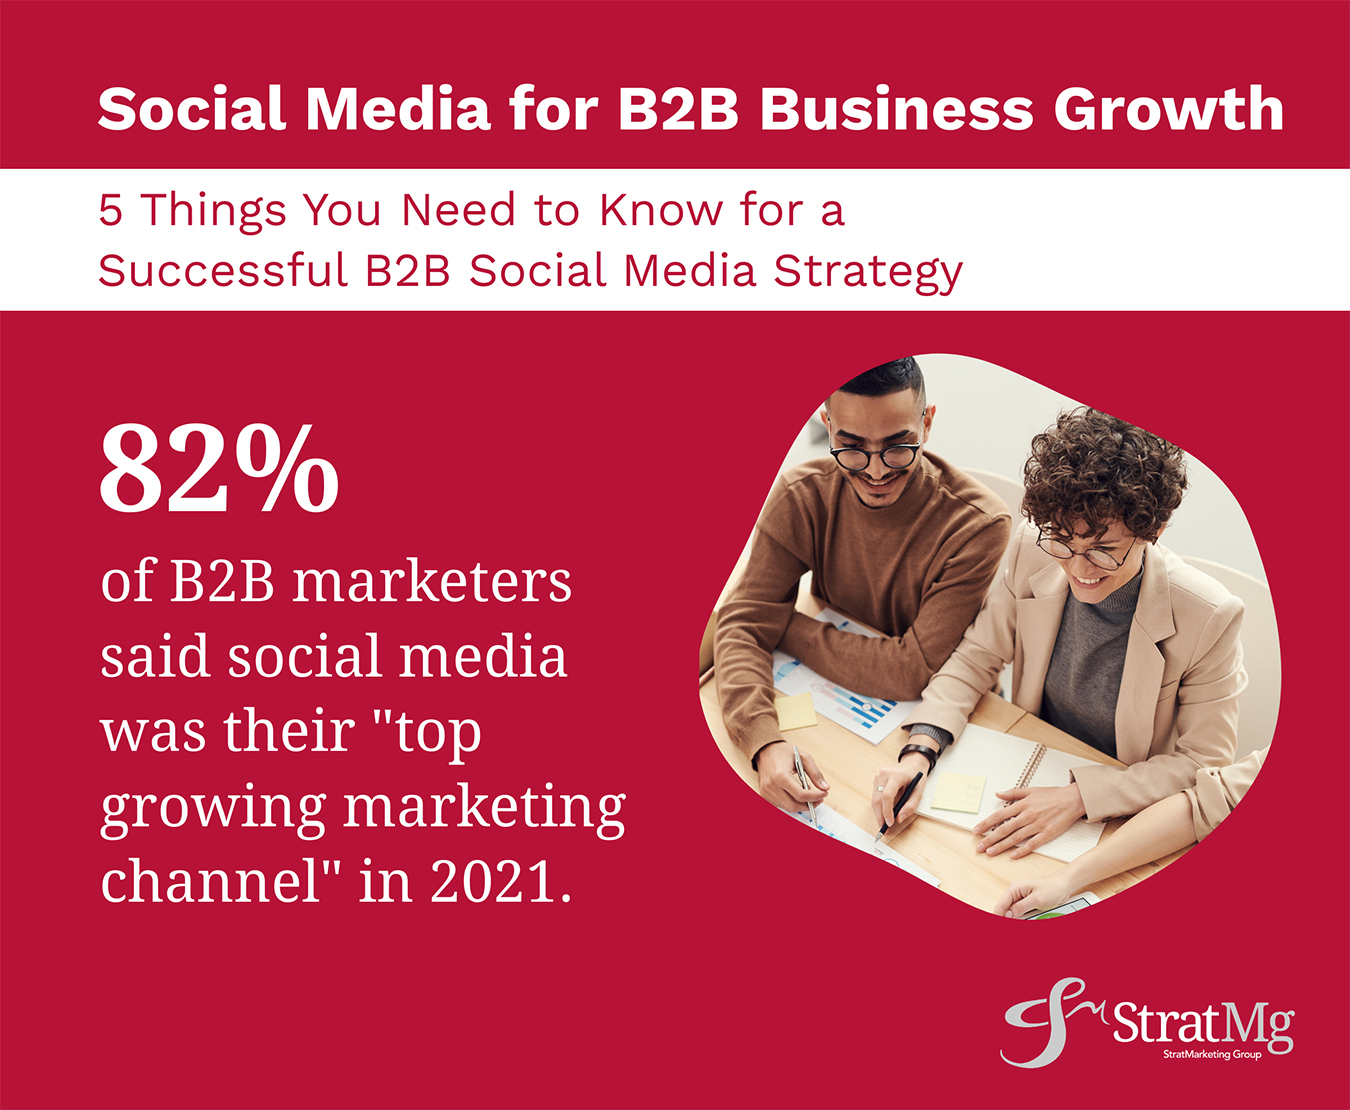 The headline reads "Social media for B2B business growth" and the text states "82% of B2B marketers said social media was their 'top growing marketing channel' in 2021.